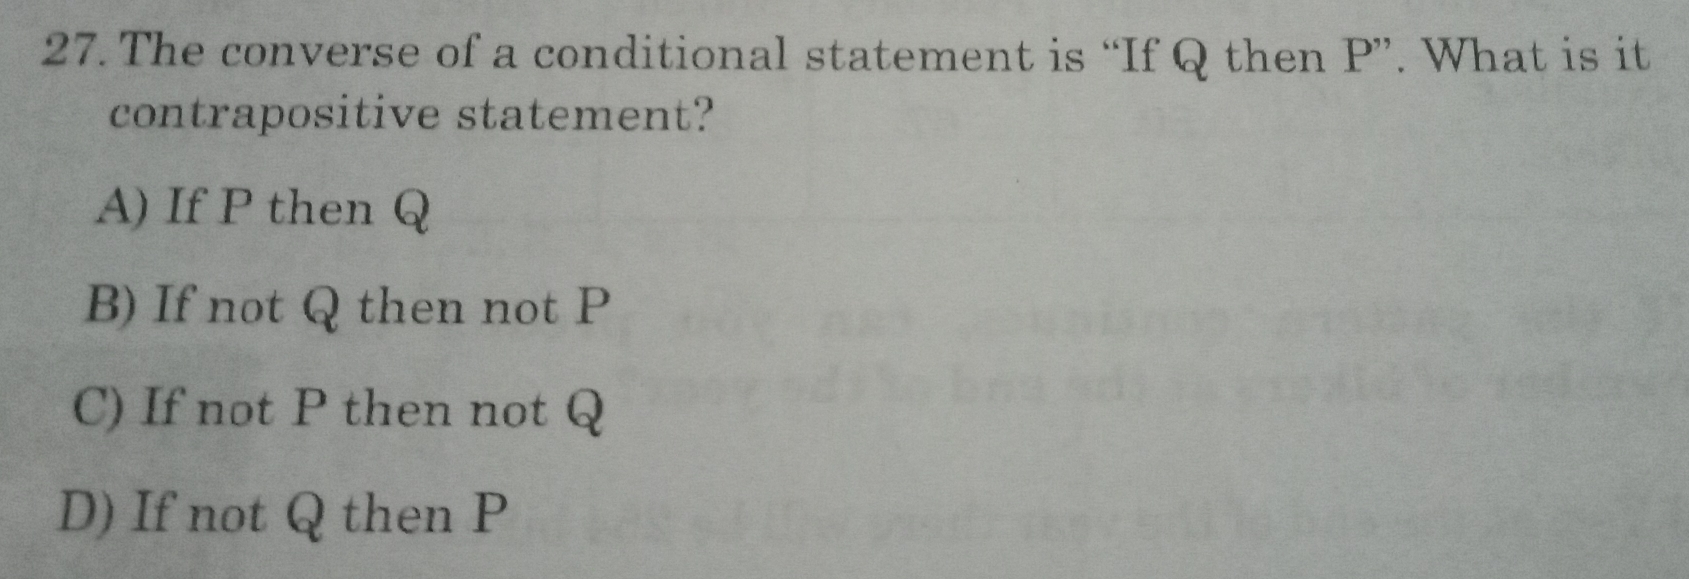 27. The converse of a conditional statement is “If Q then P”. What is it contrapositive statement? A If P then Q B If not Q then not P C If not P then not Q D If not Q then P